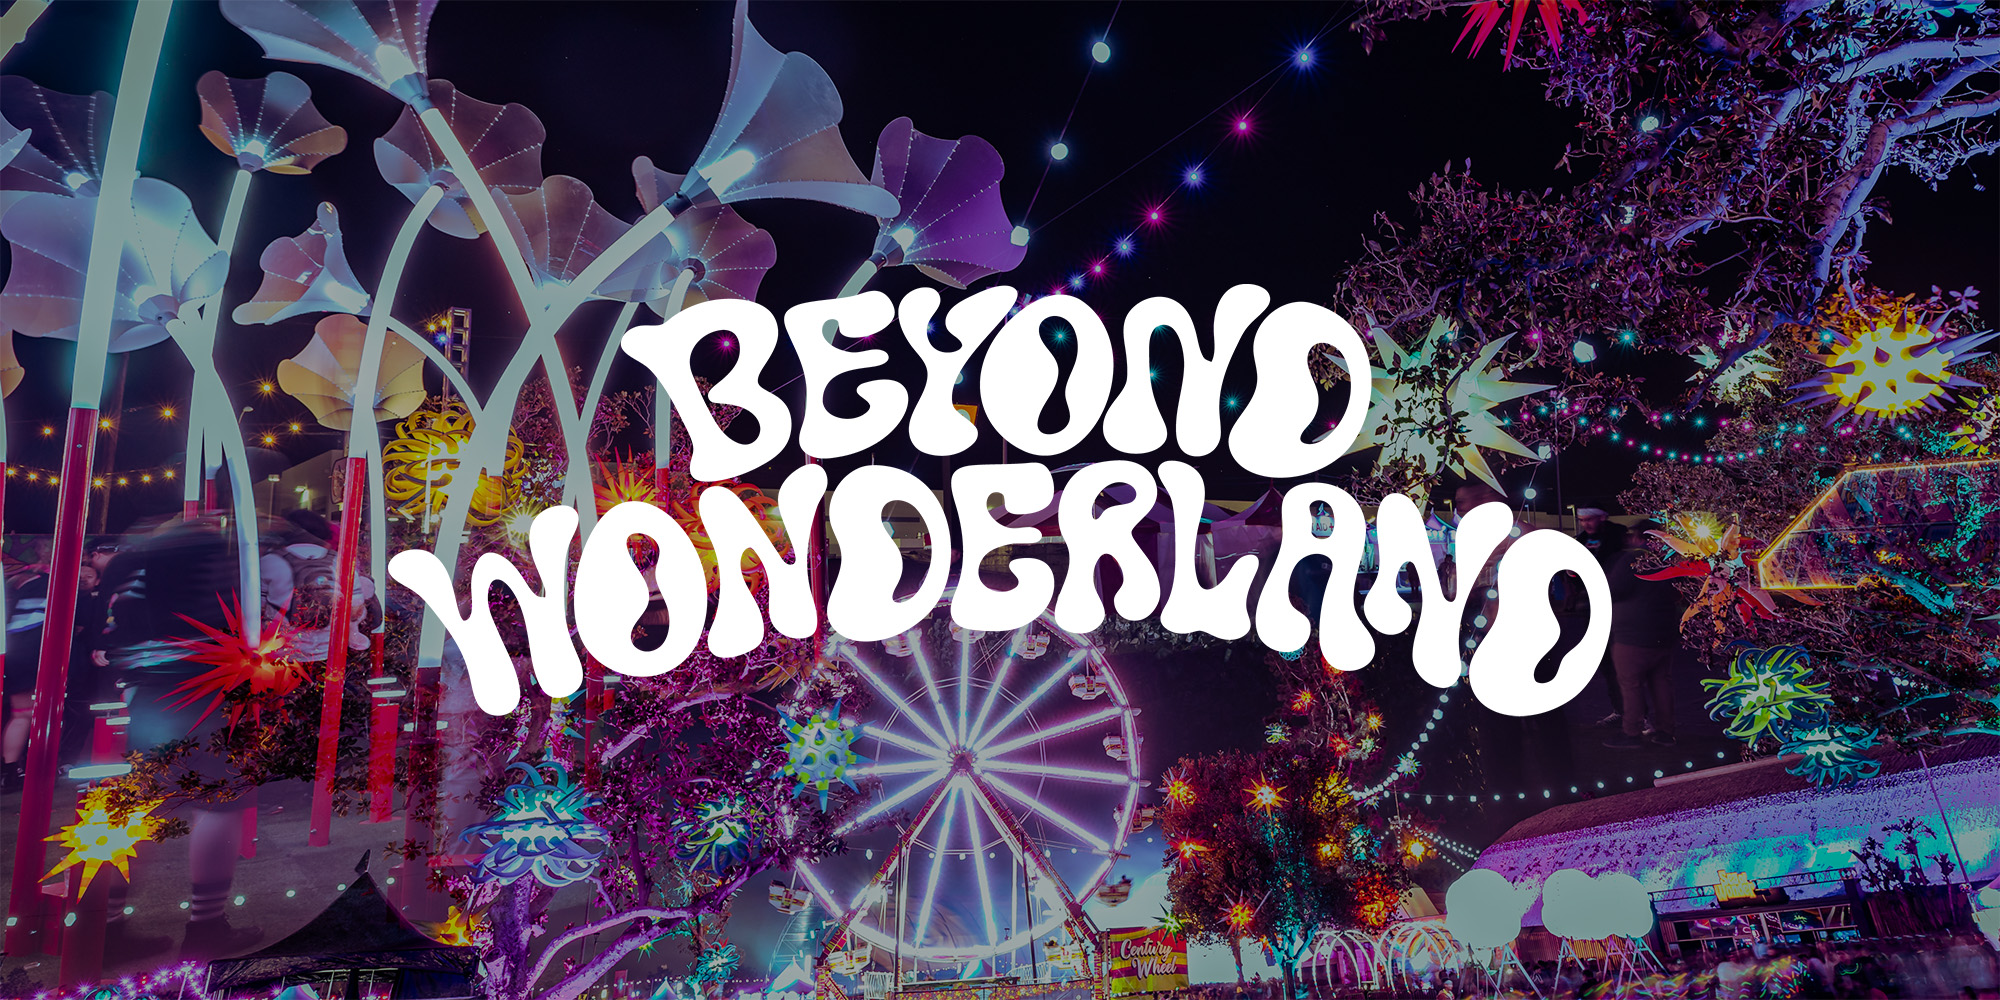 Insomniac's Beyond Wonderland Virtual Rave-A-Thon had 3.5 Million Viewers -   - The Latest Electronic Dance Music News, Reviews & Artists